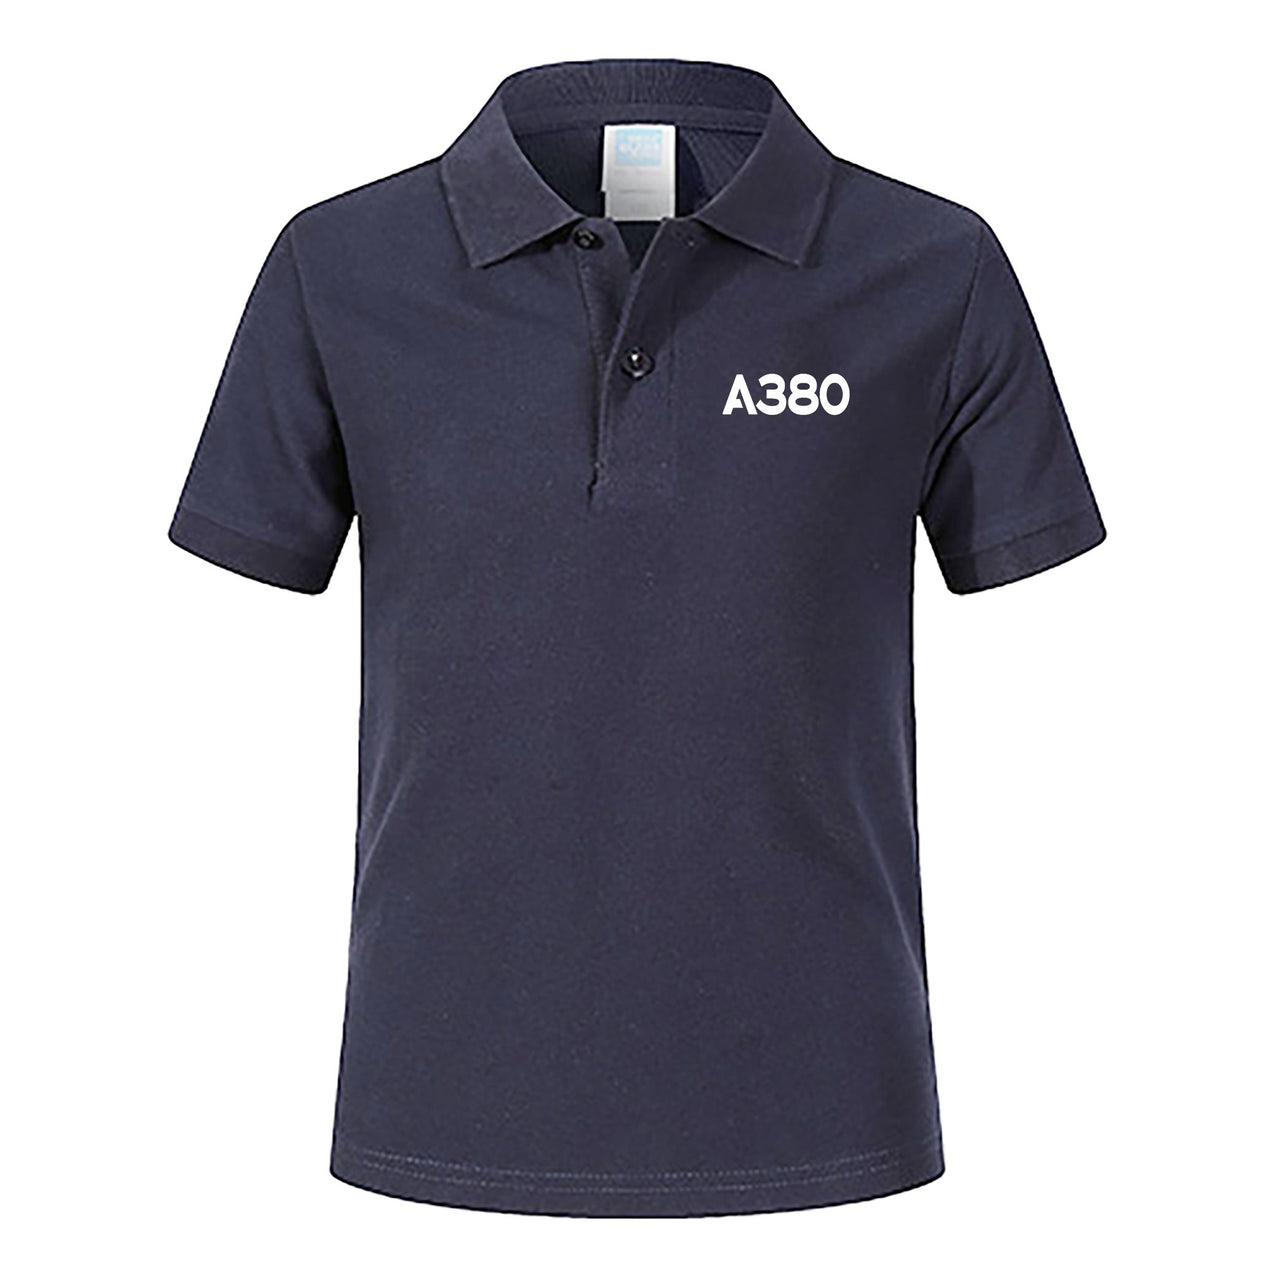 A380 Flat Text Designed Children Polo T-Shirts